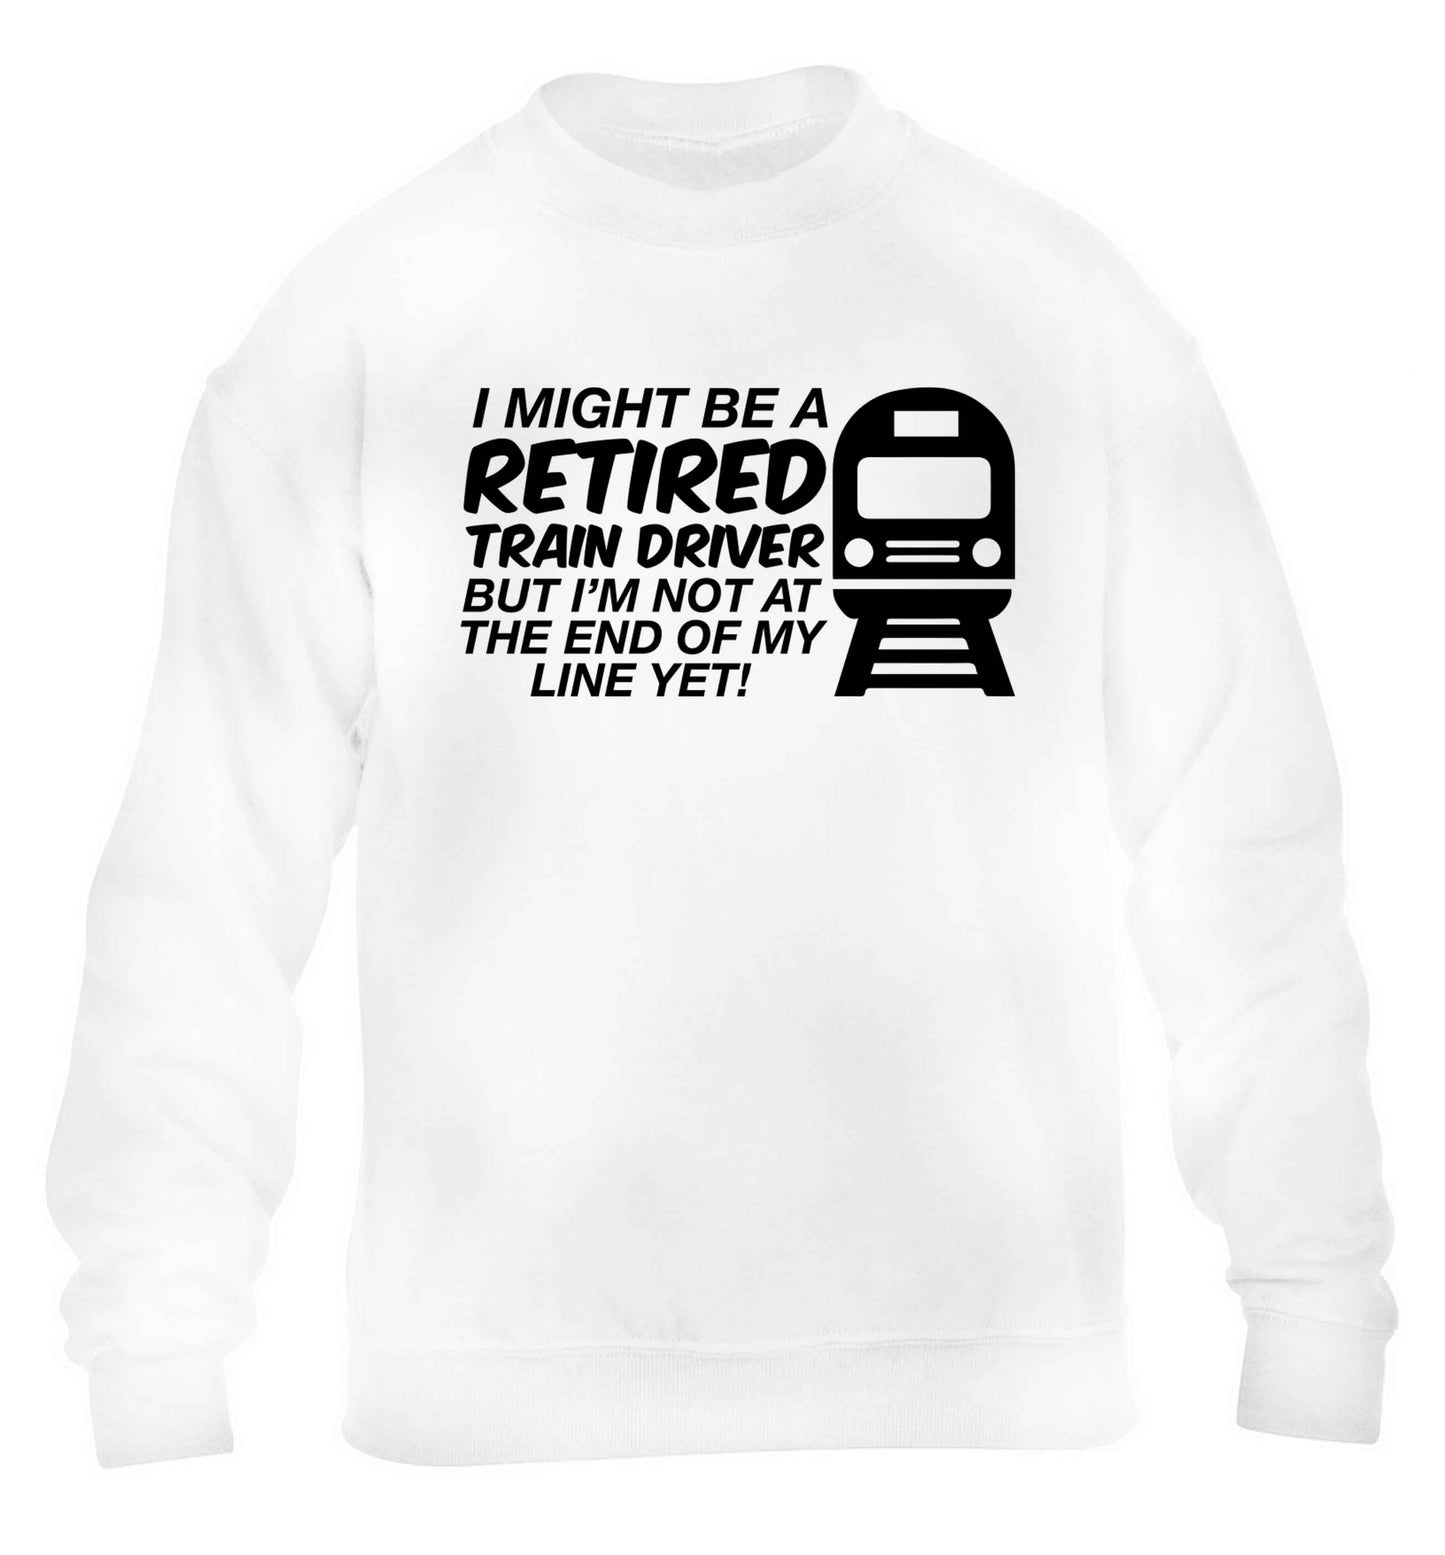 Retired train driver but I'm not at the end of my line yet children's white sweater 12-13 Years